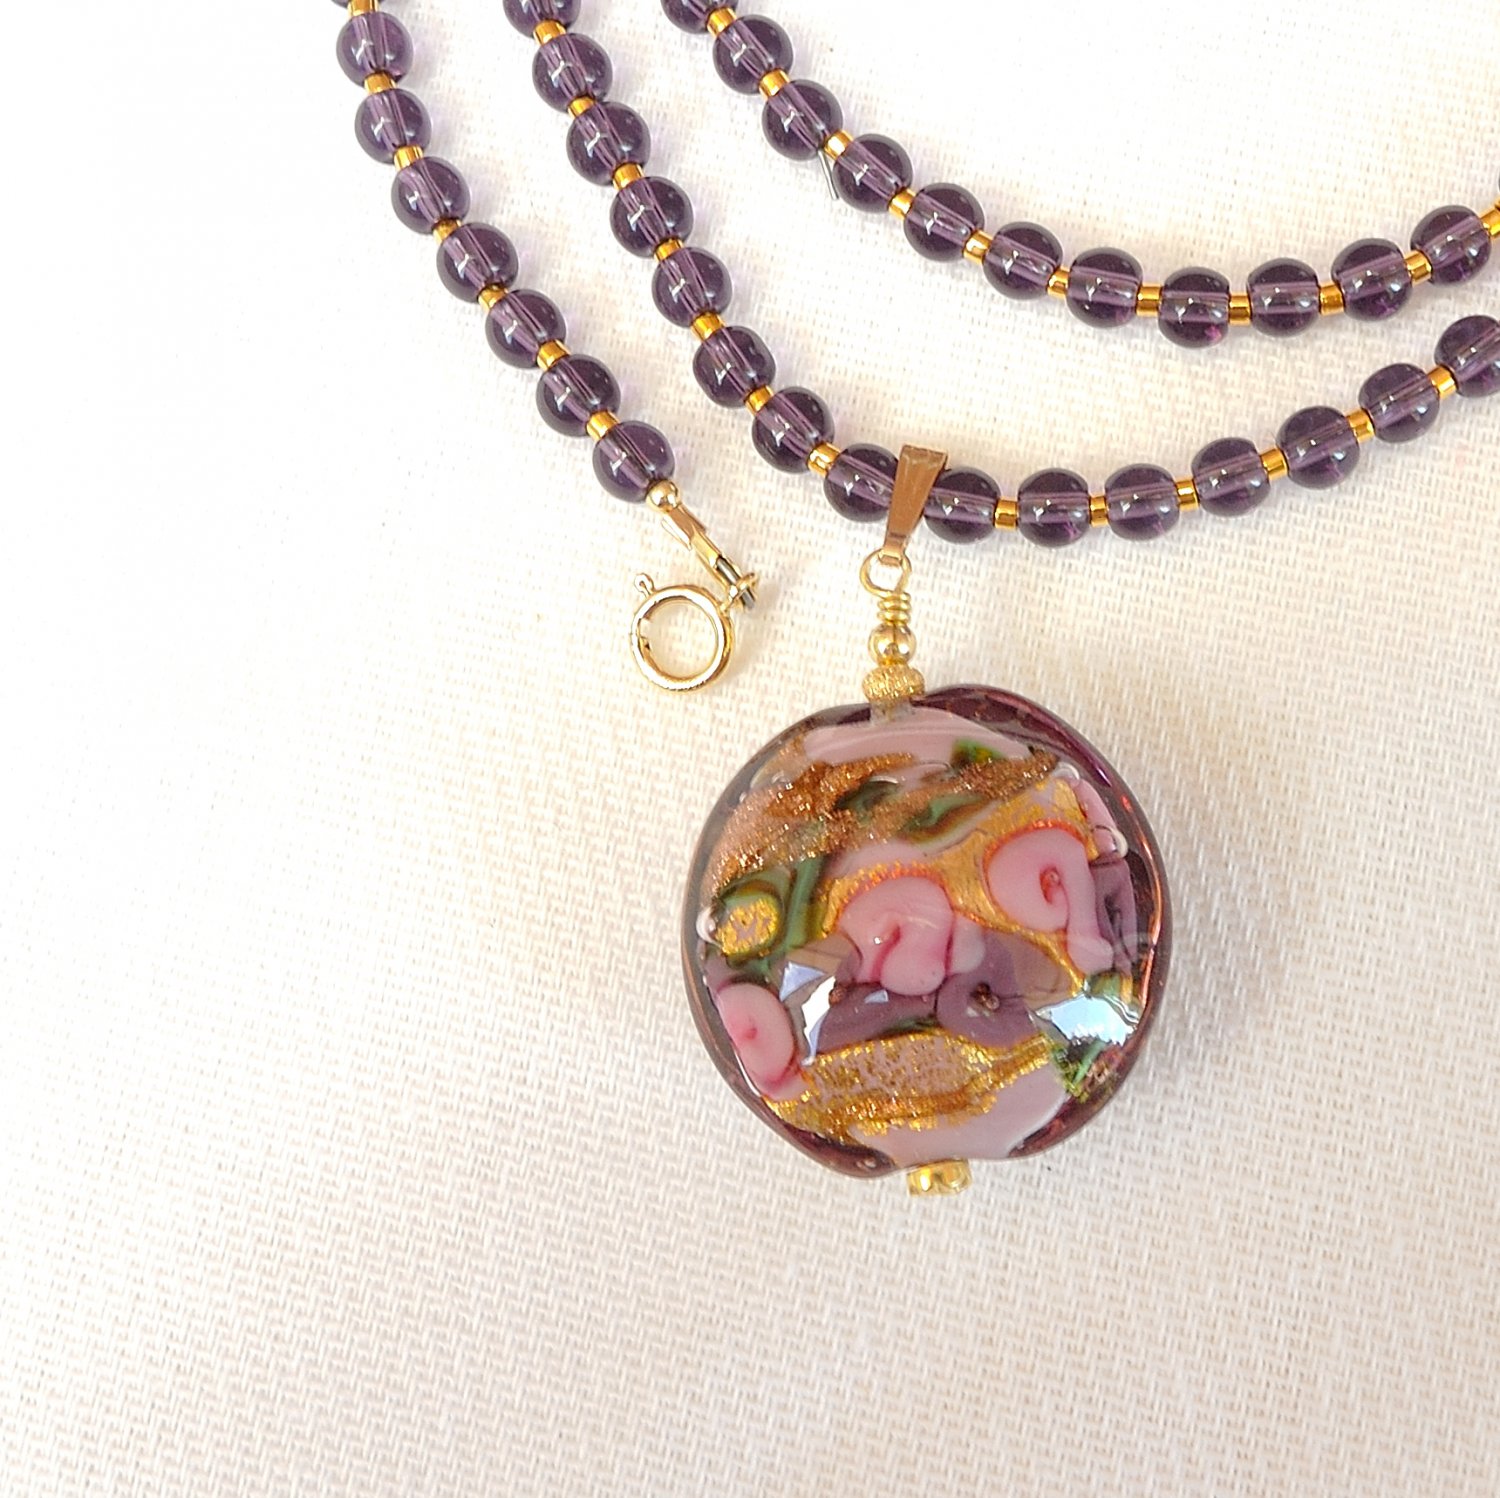 Genuine Murano Glass Pendant And Amethyst Quartz Gold Filled Necklace